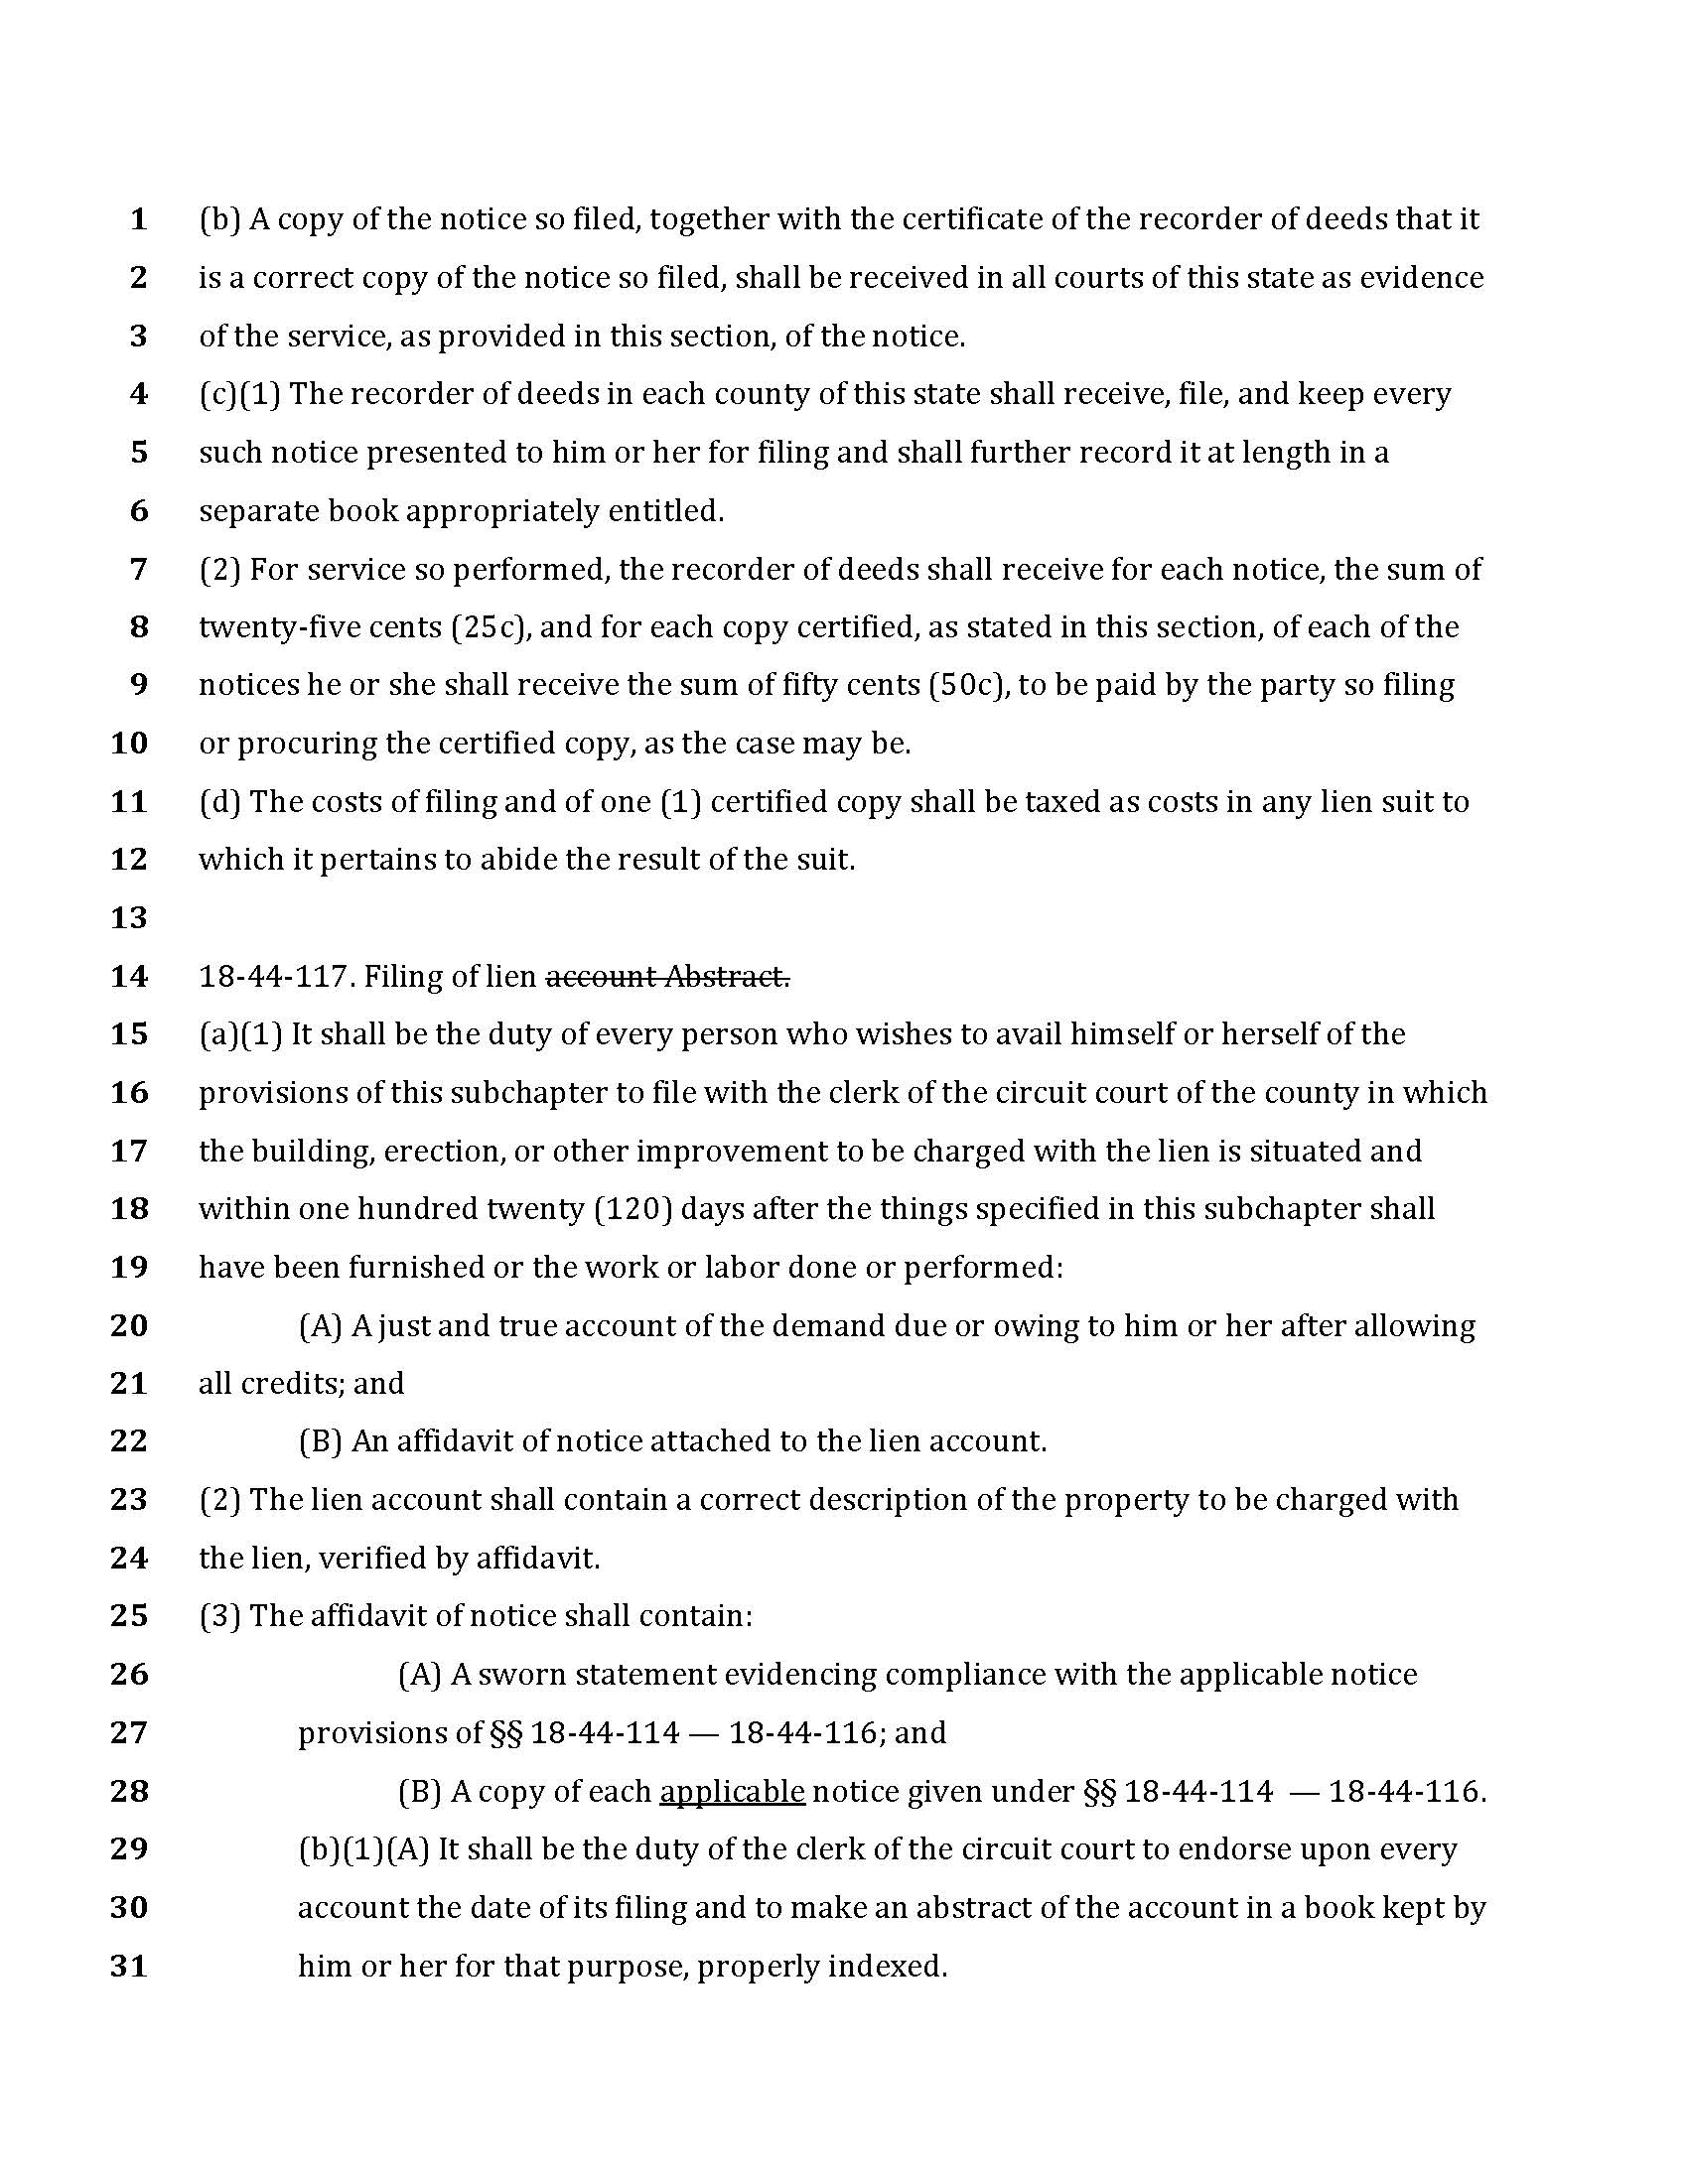 final-bill-lien-law-revisions_Page_10.jpg